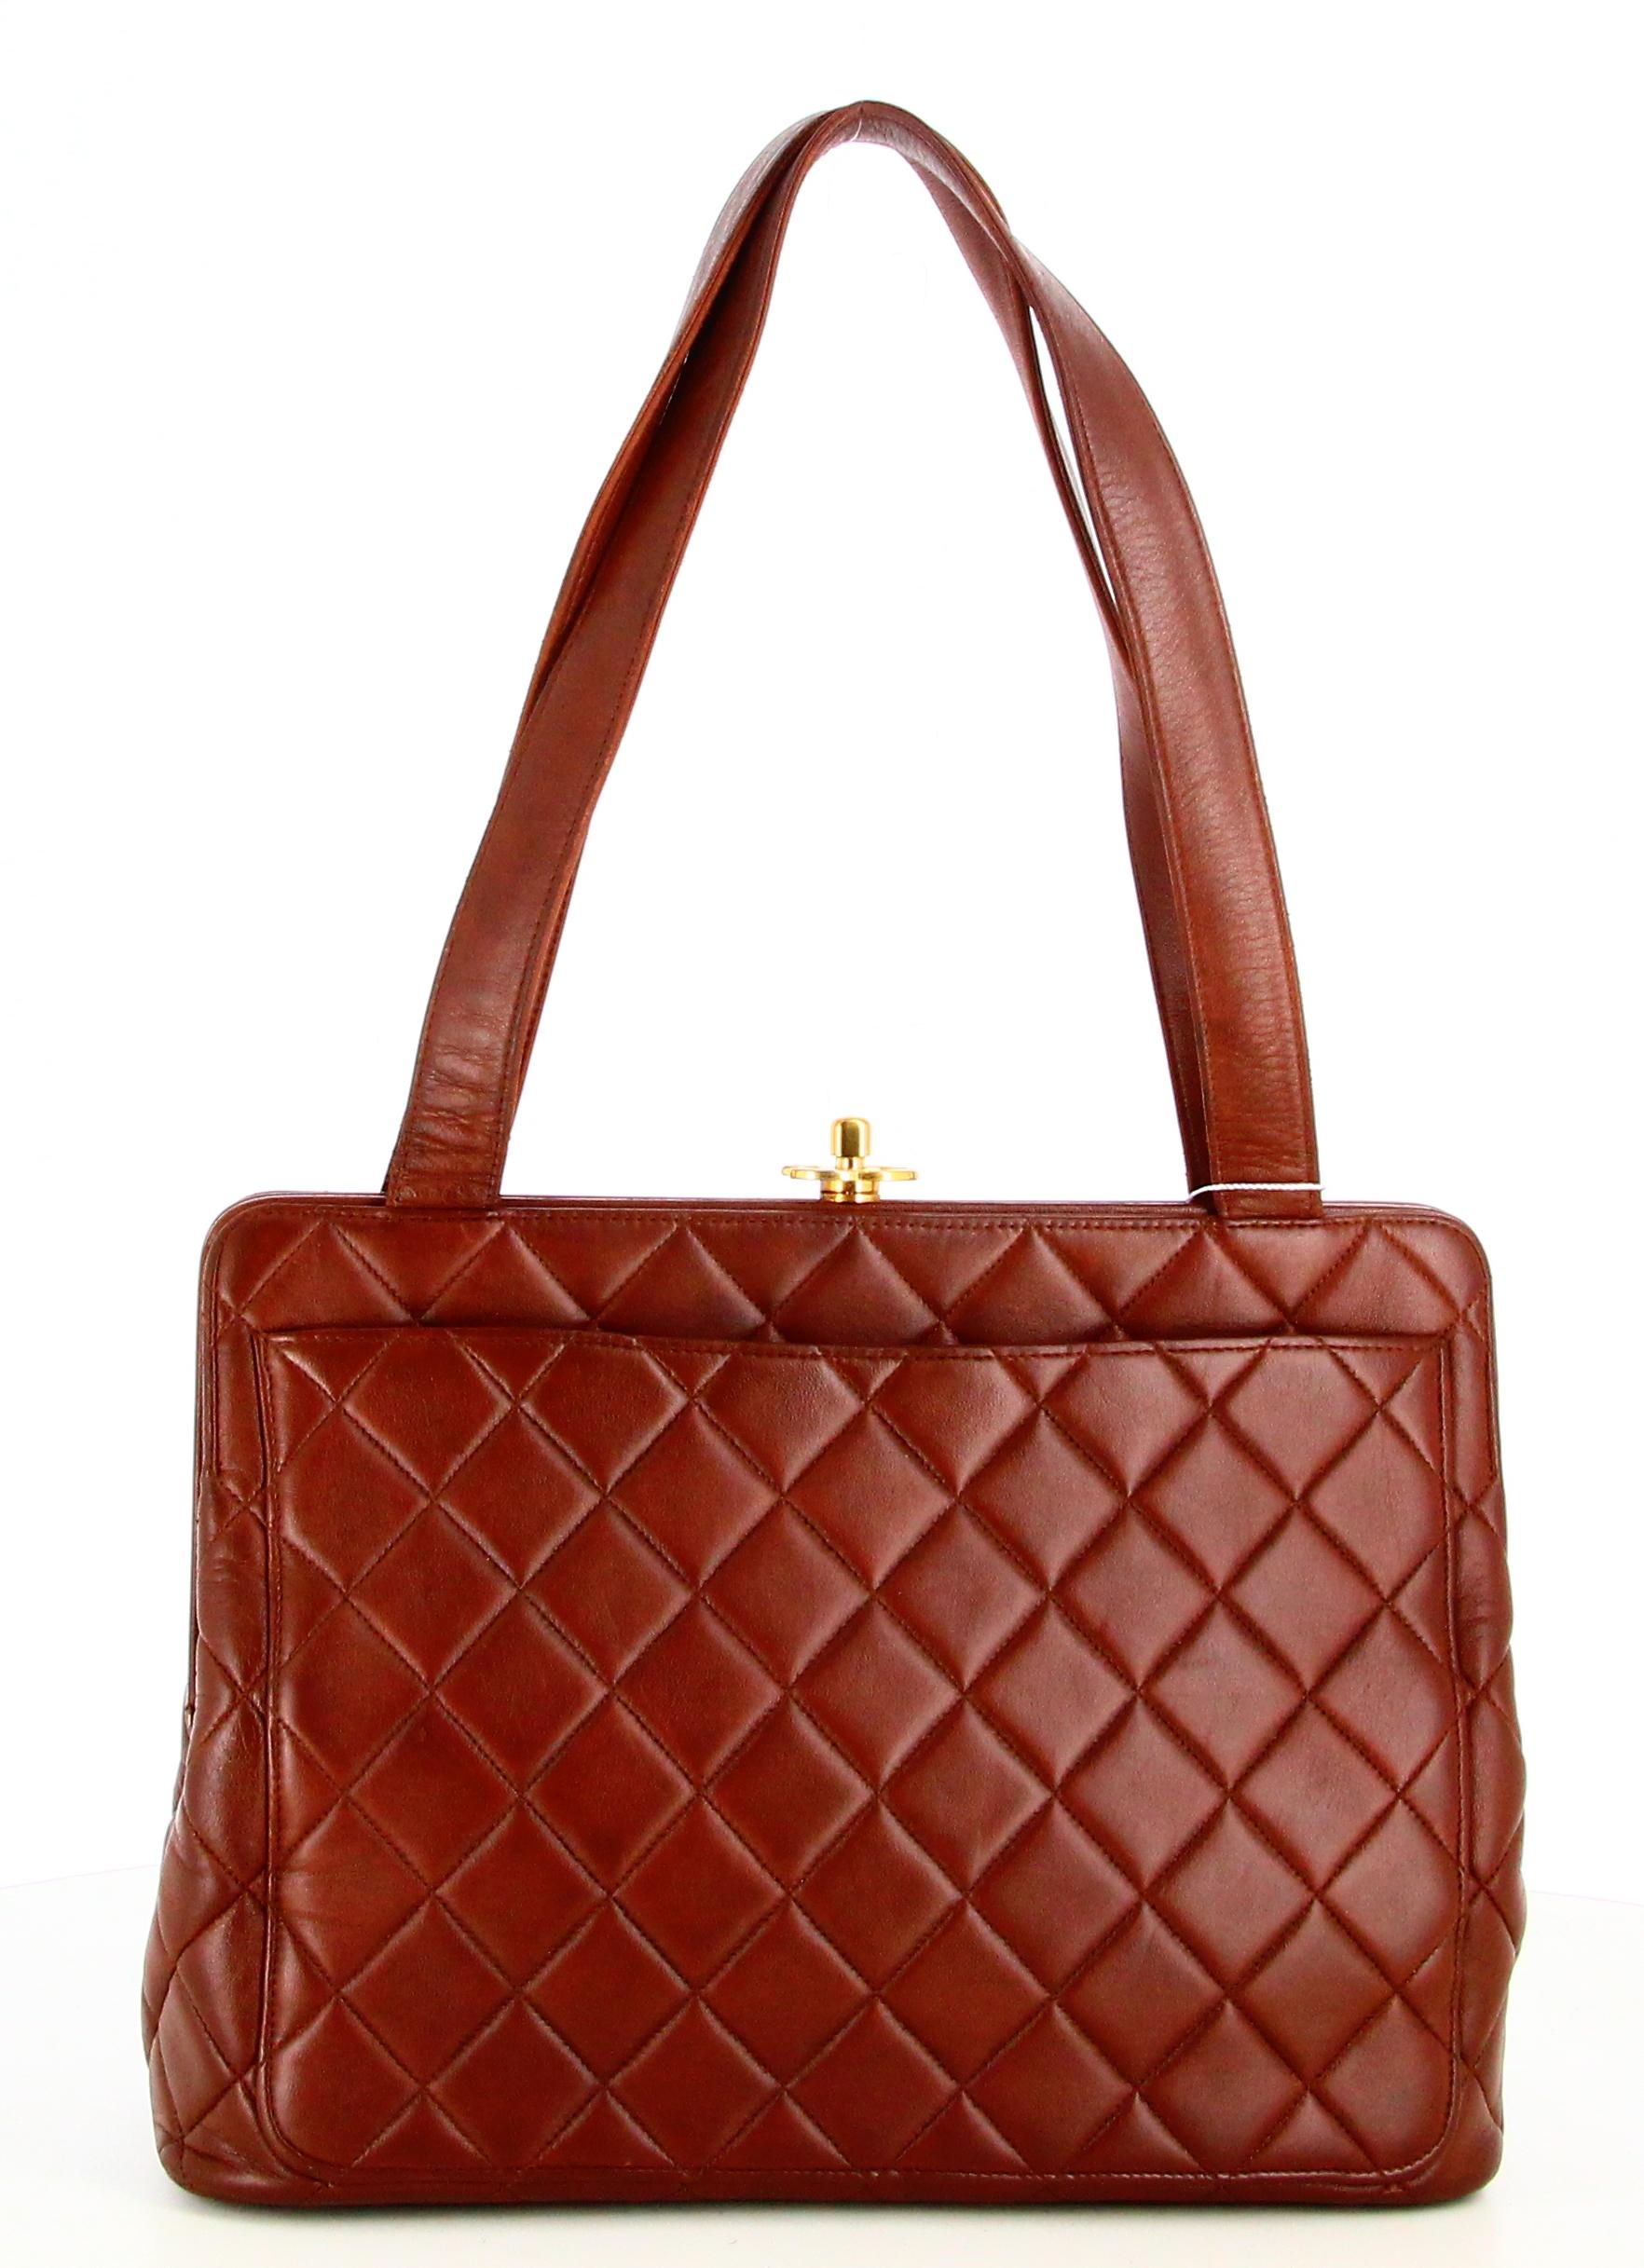 1996 Chanel Handbag Brown Quilted leather For Sale 2